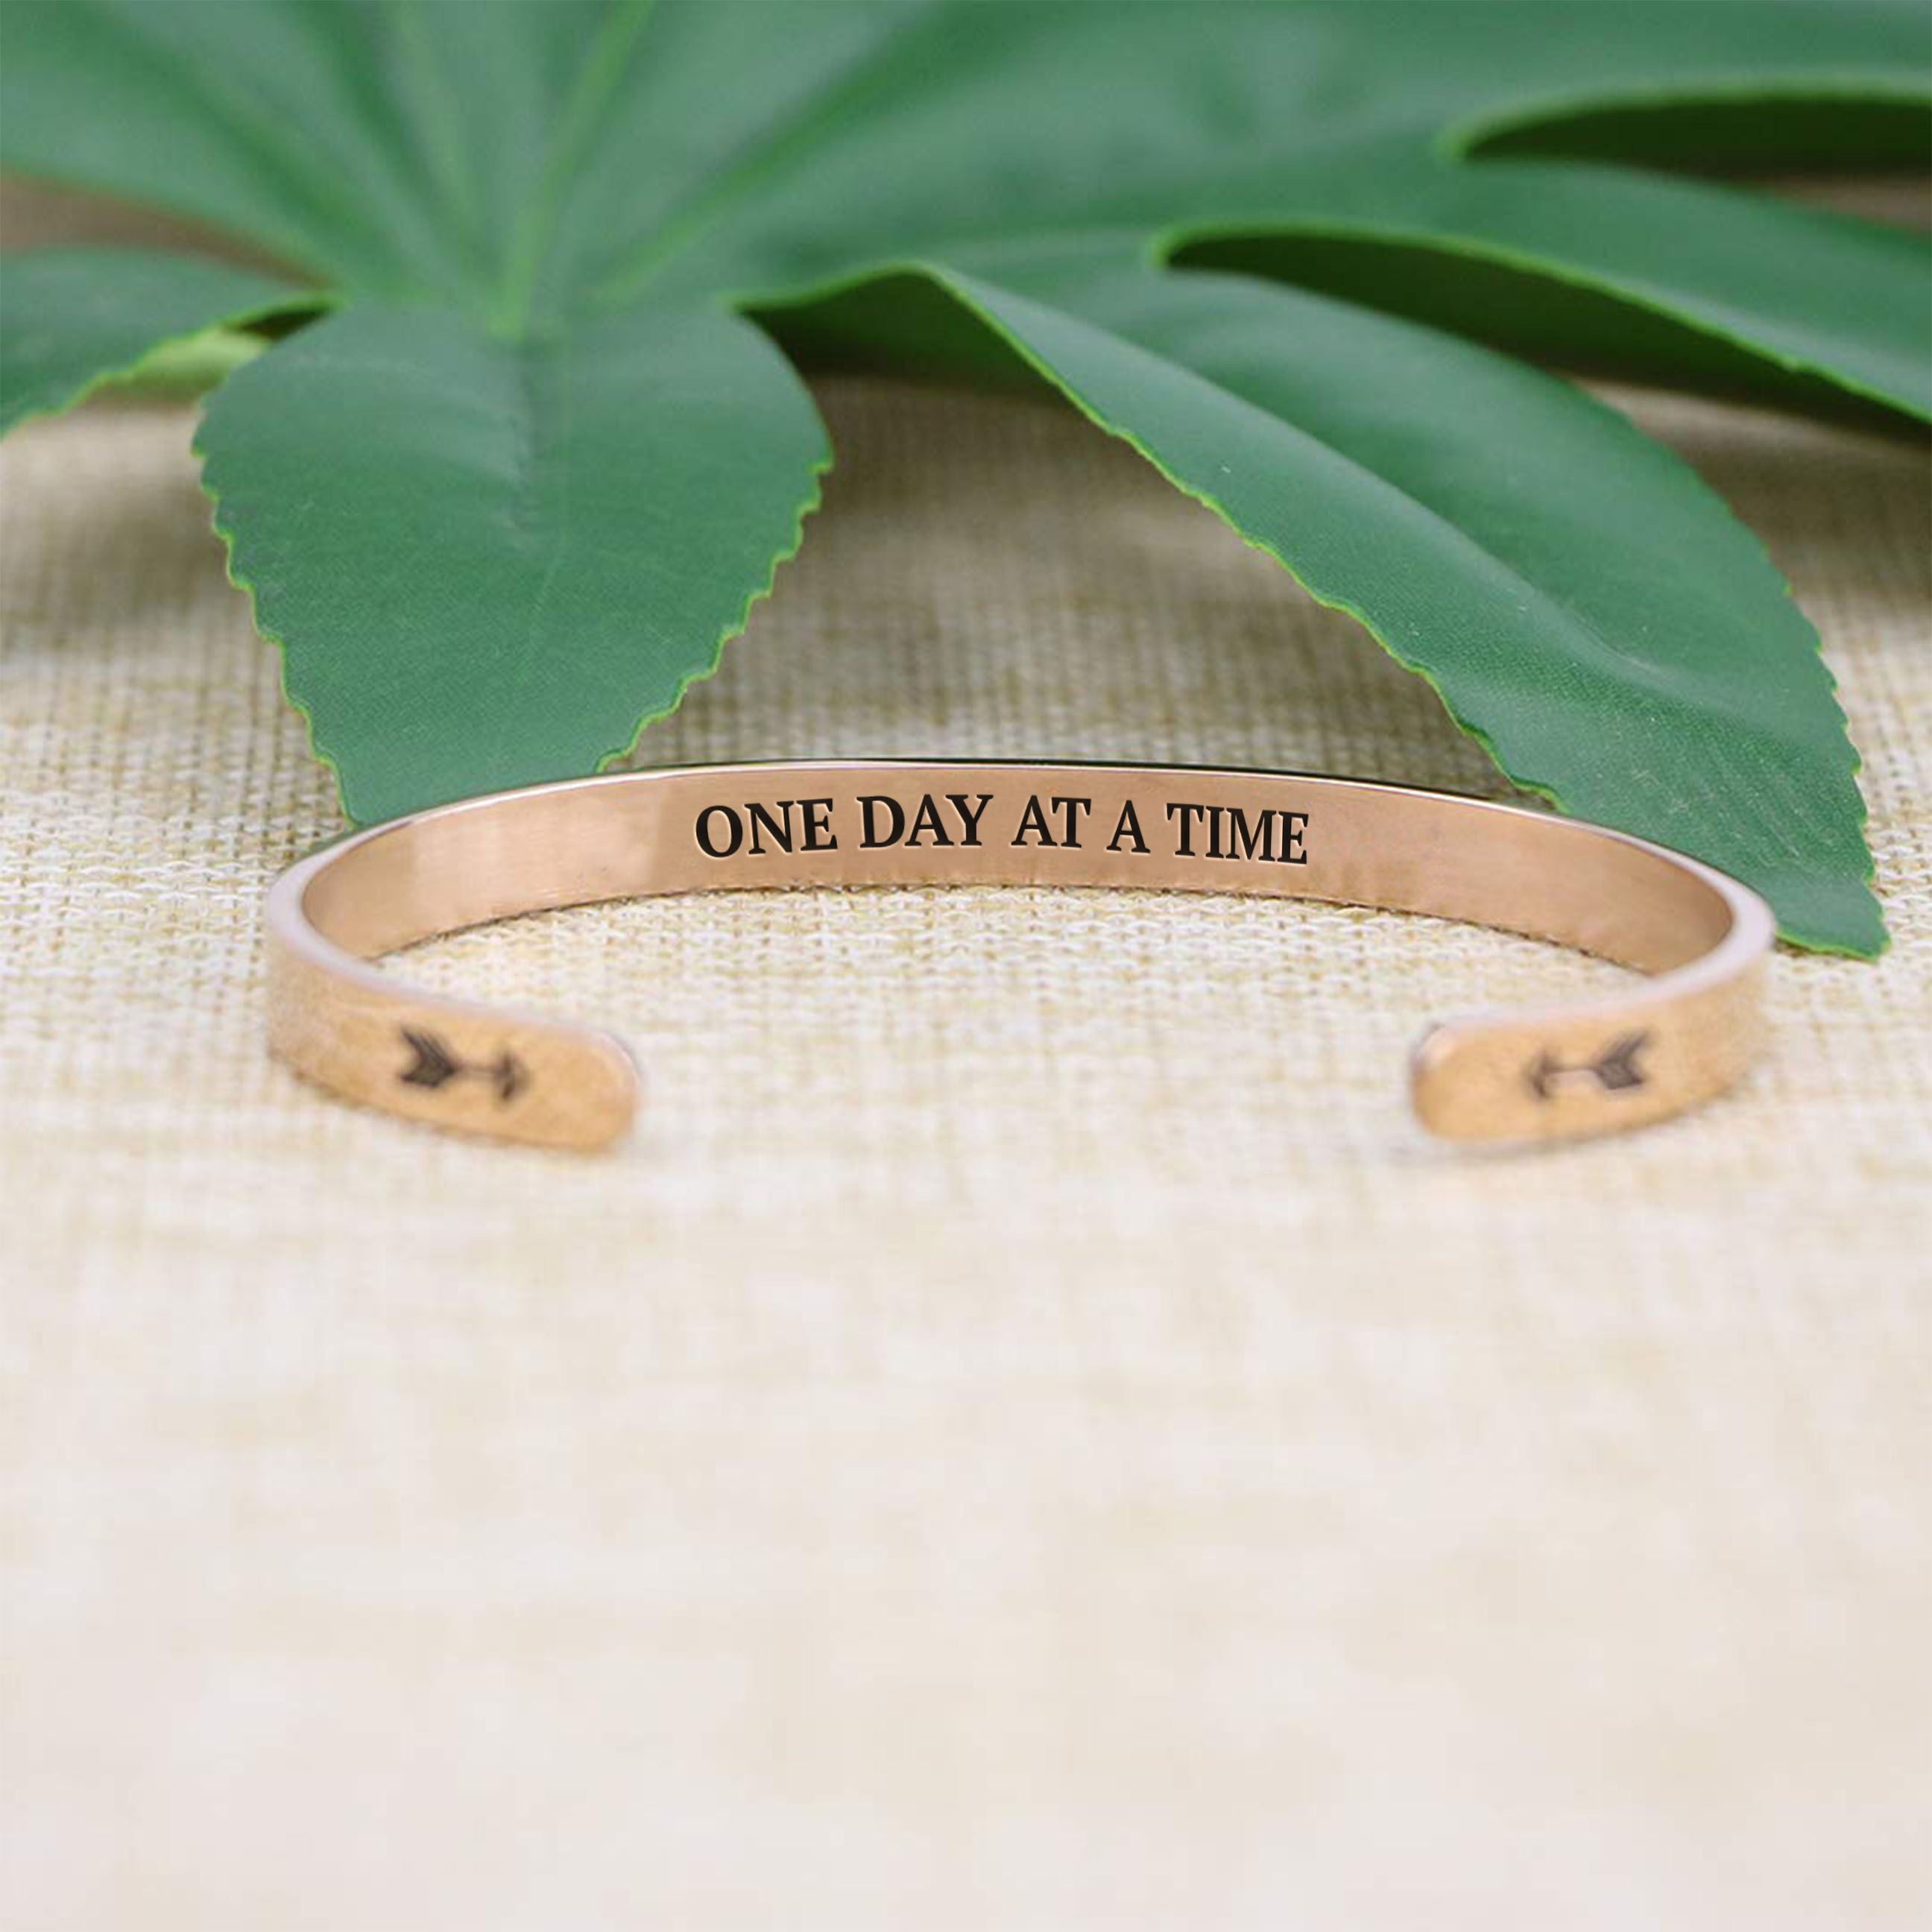 One day at a time bracelet with rose gold plating with message in focus on a burlap surface with a leafy background